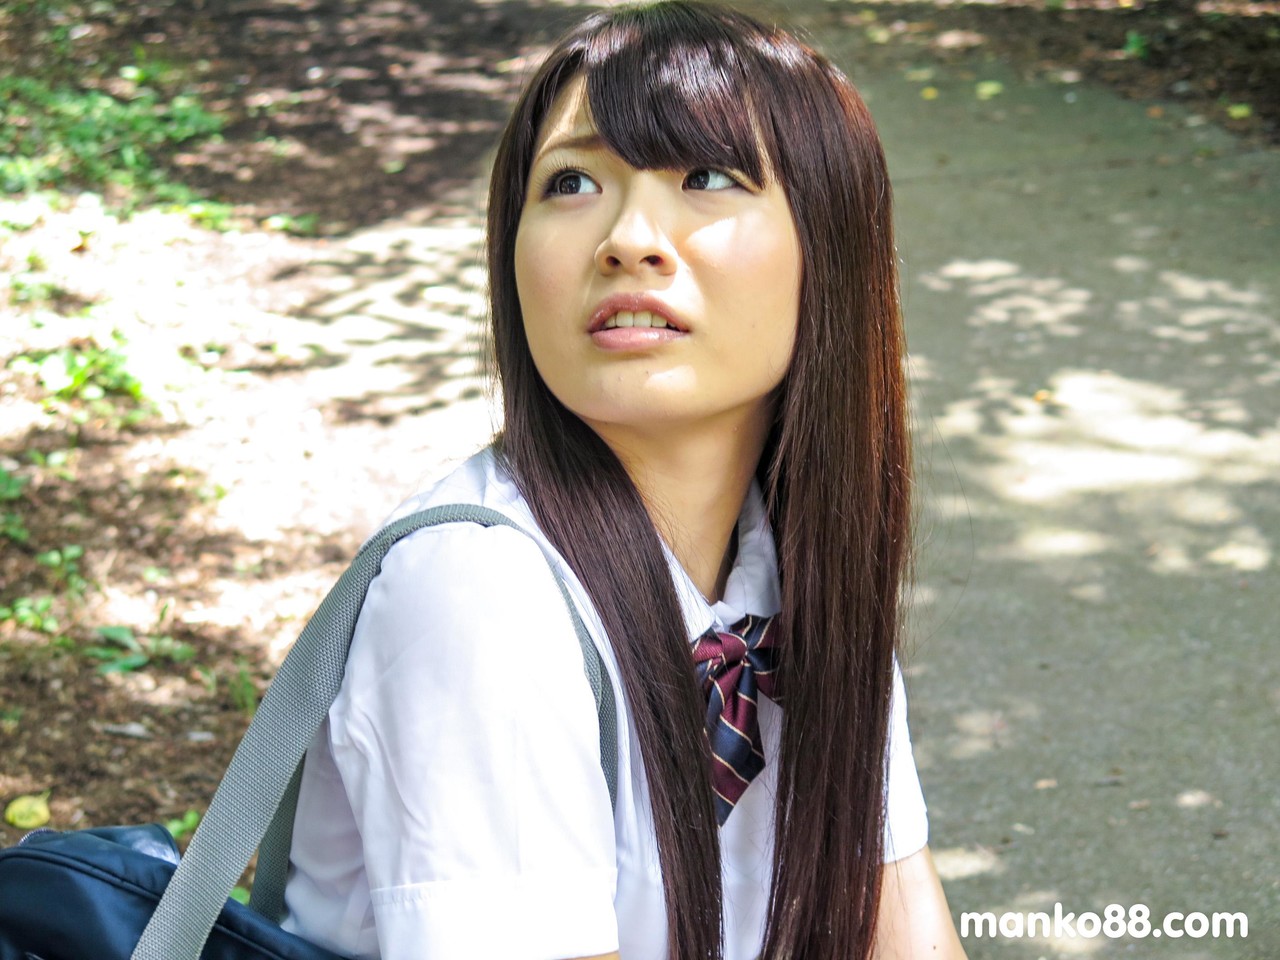 Japanese schoolgirl gets picked up in the forest and fucked perfectly